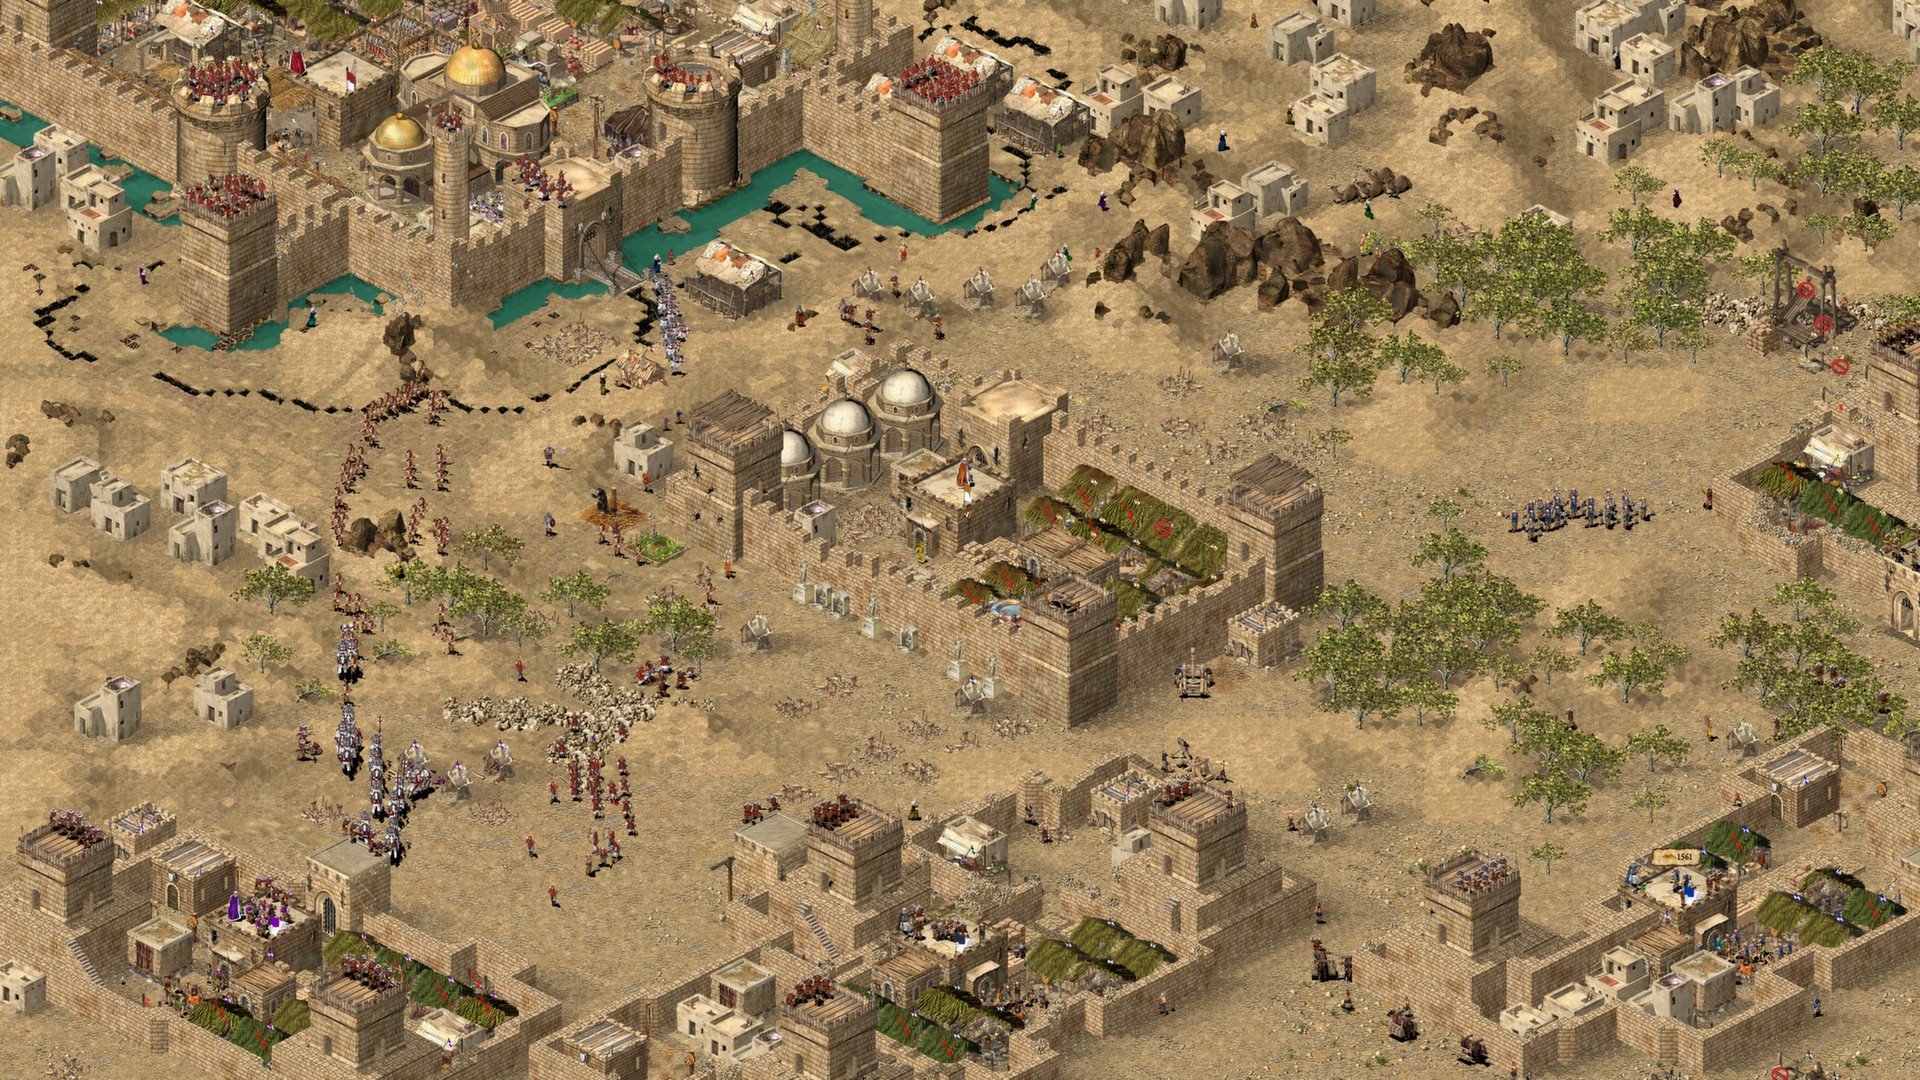 game stronghold crusader for pc